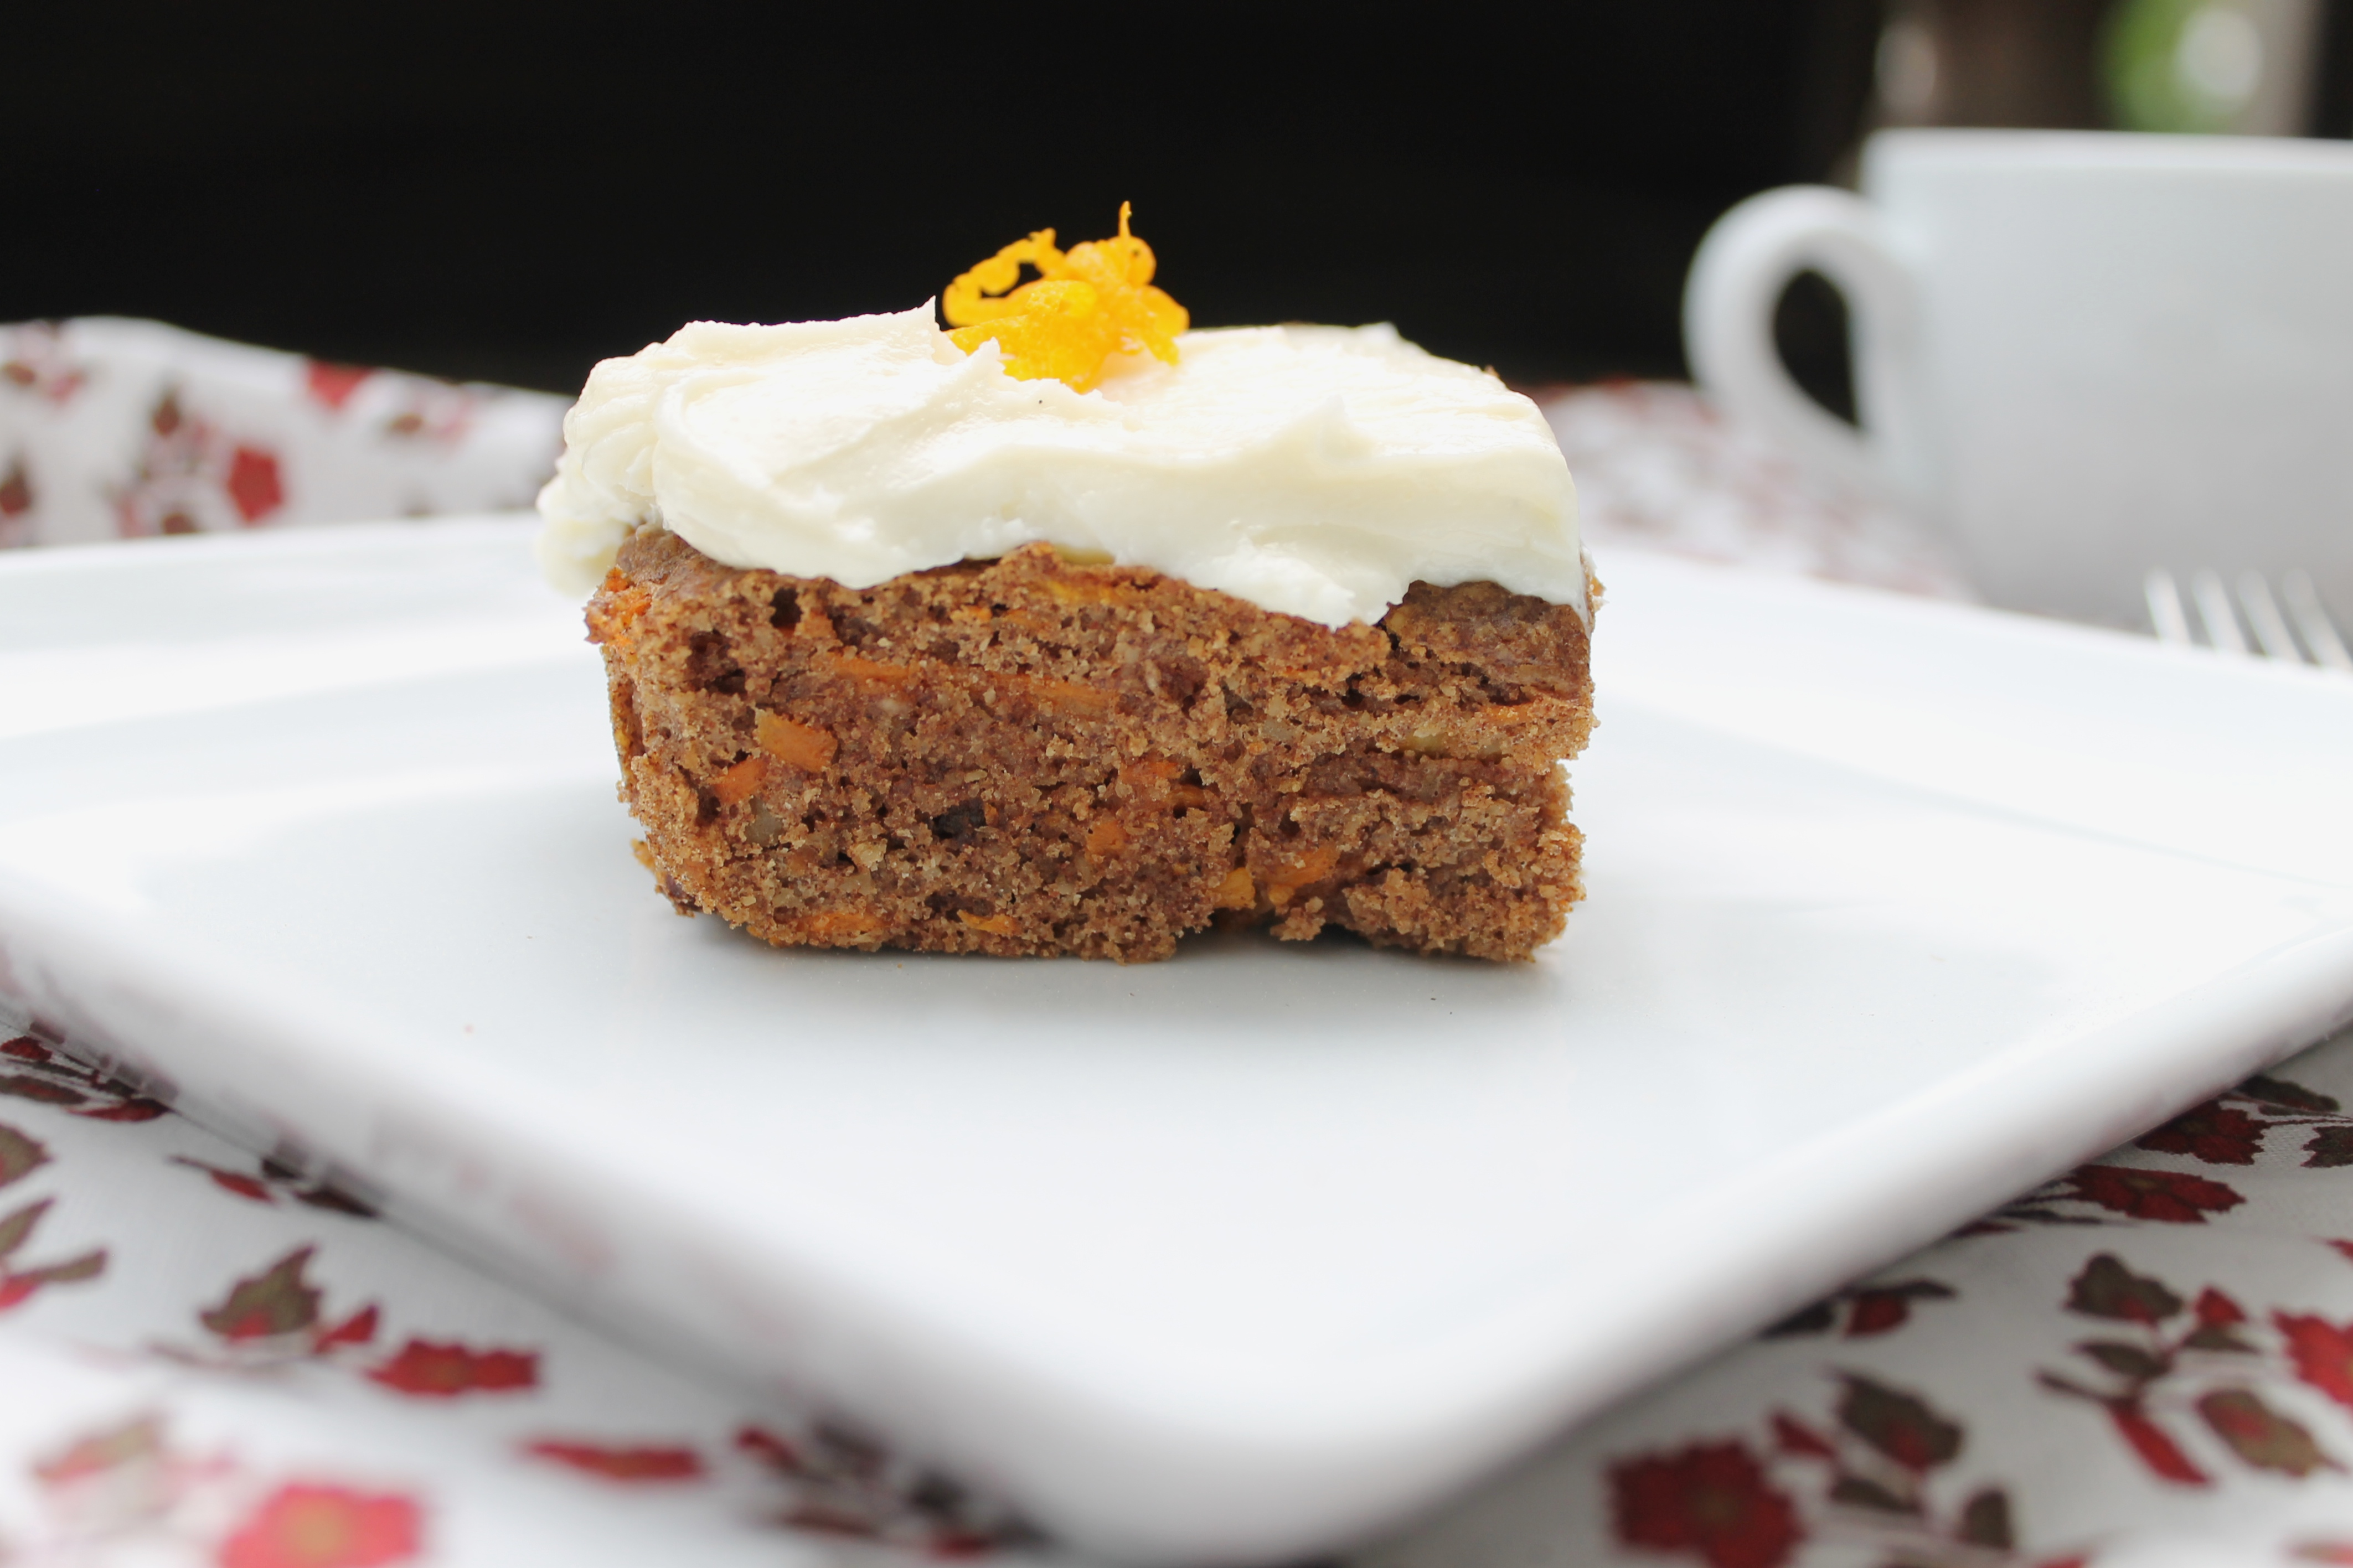 Paleo Carrot Cake with Creamy Dairy Free Frosting